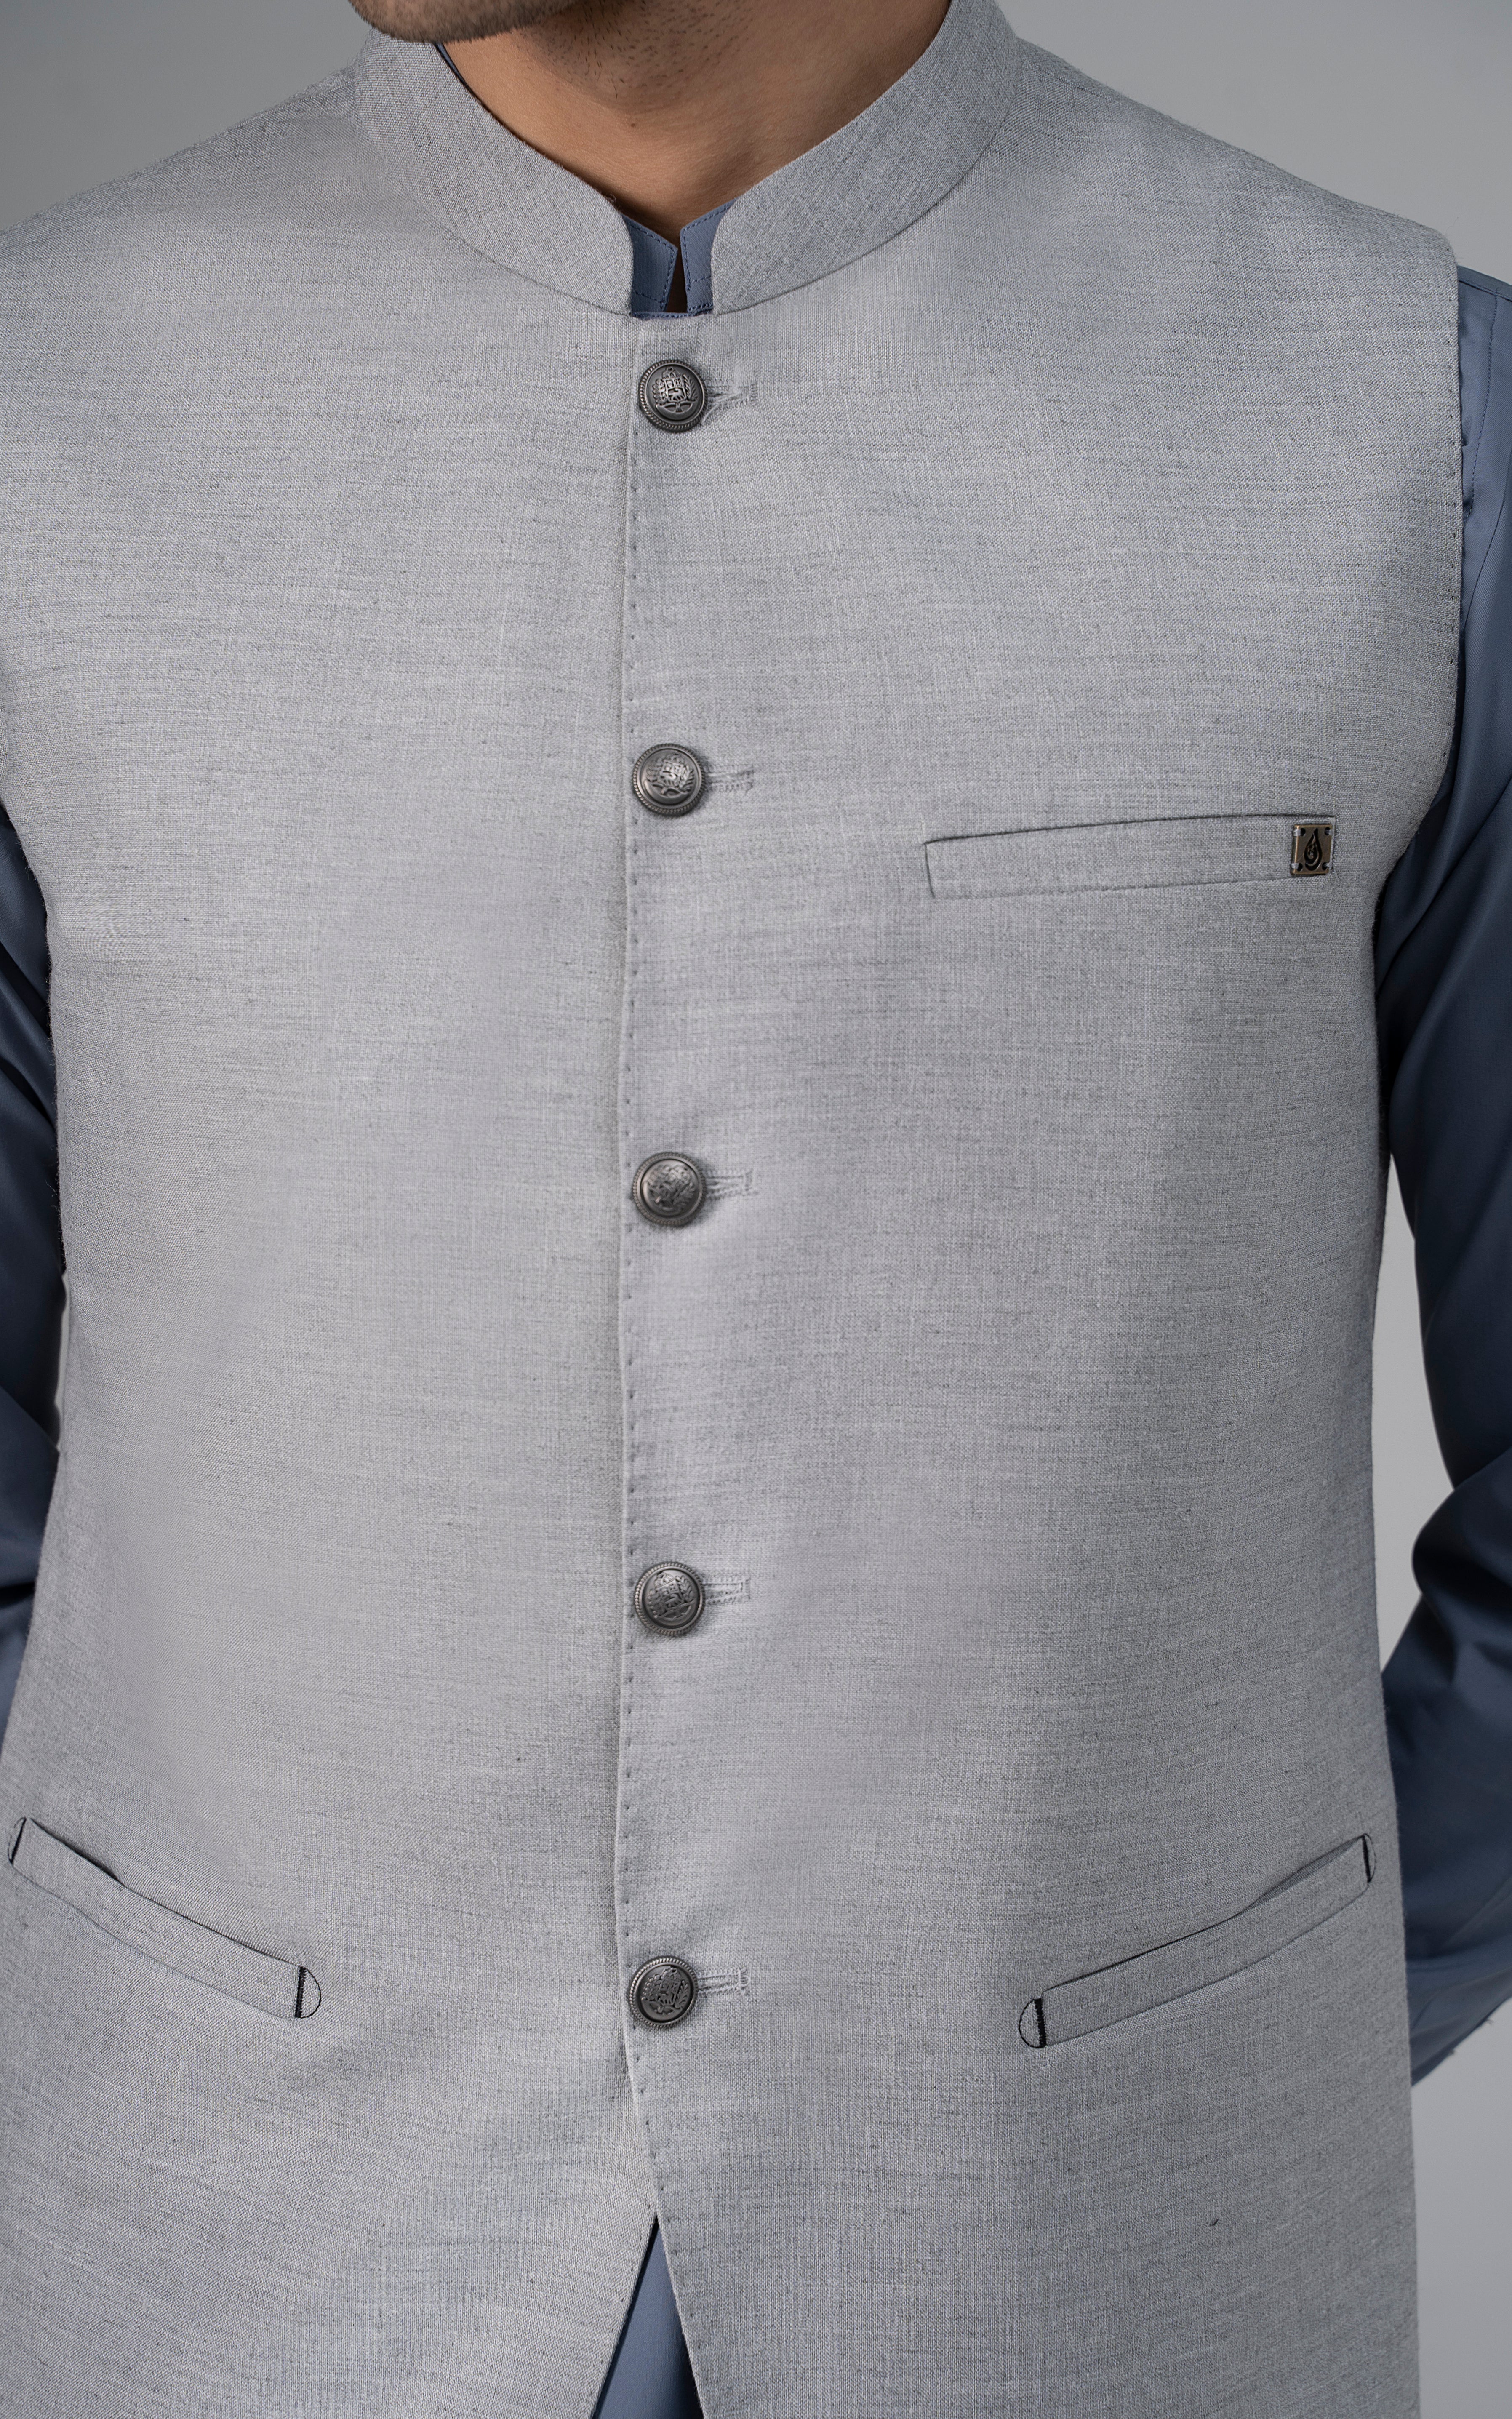 BLENDED WAISTCOAT - PREMIUM COLLECTION  CLOUDY GREY